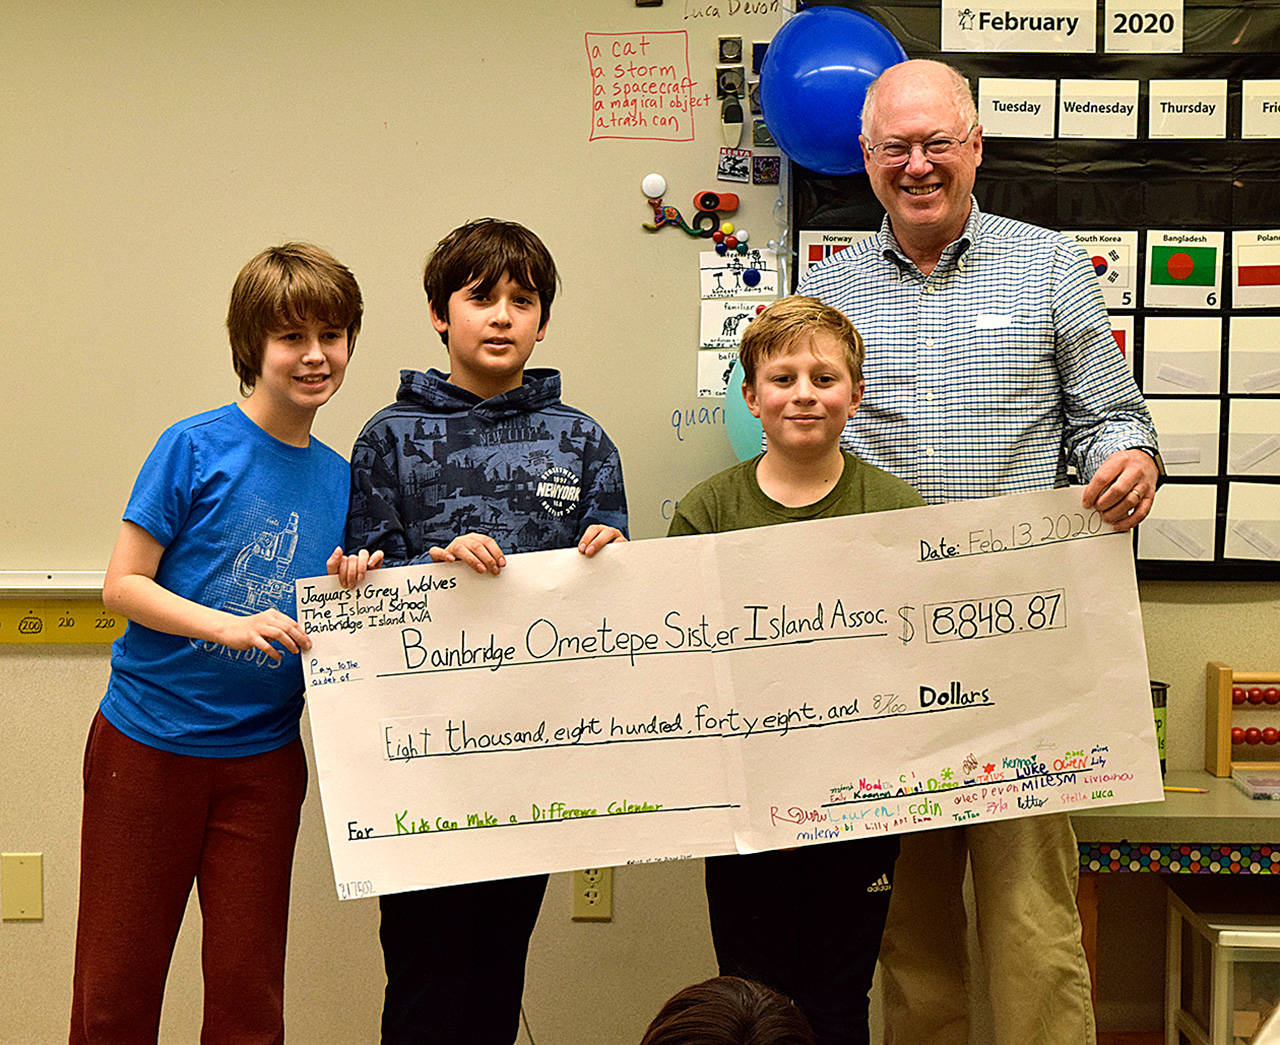 Three fifth-grade students present a check from their calendar sales to Paul Carroll of Bainbridge Ometepe Sister Islands Association. (Photo courtesy of The Island Schoo)